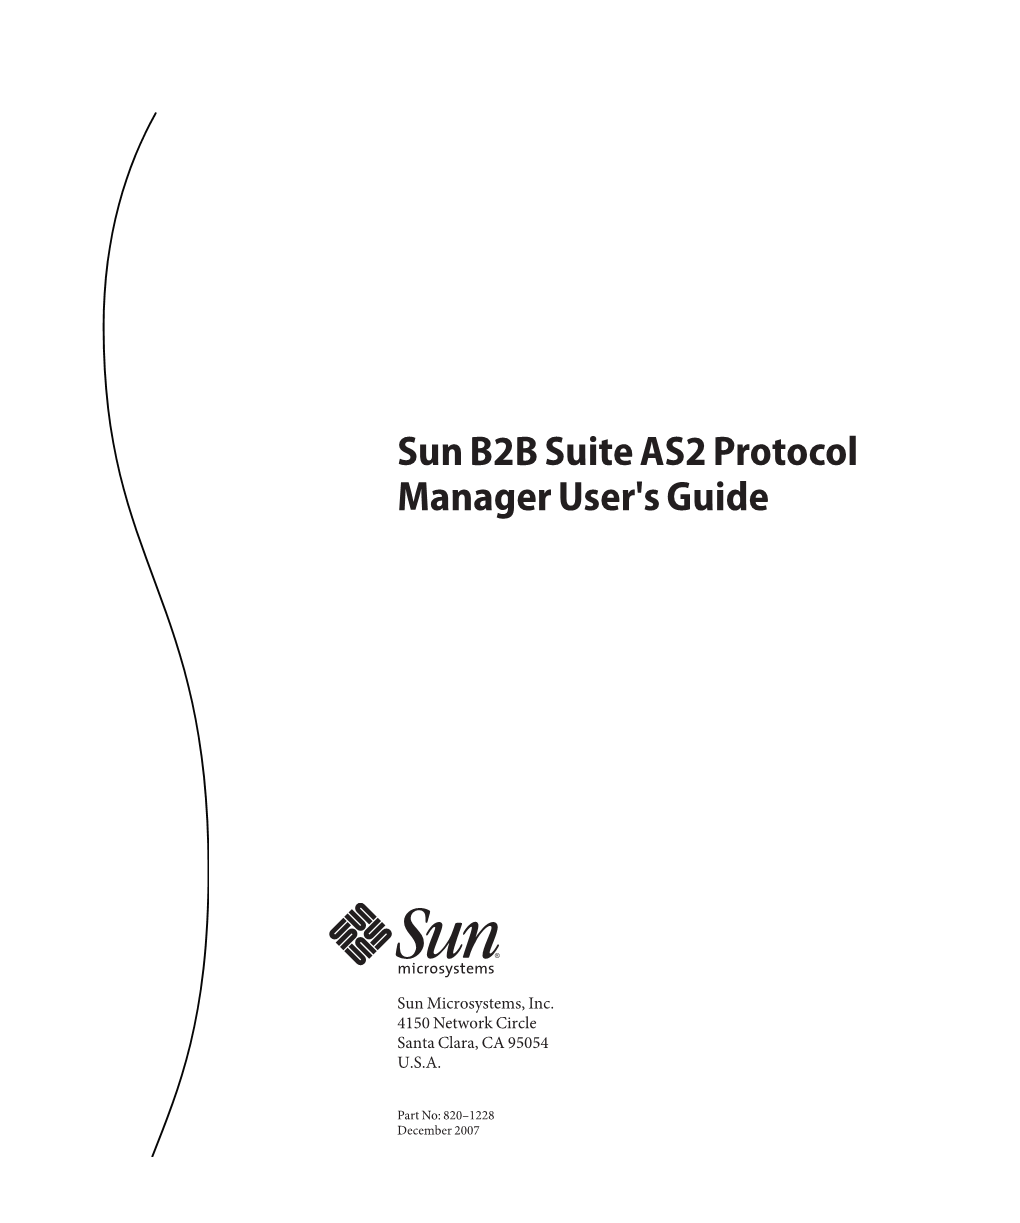 Sun B2B Suite AS2 Protocol Manager User's Guide